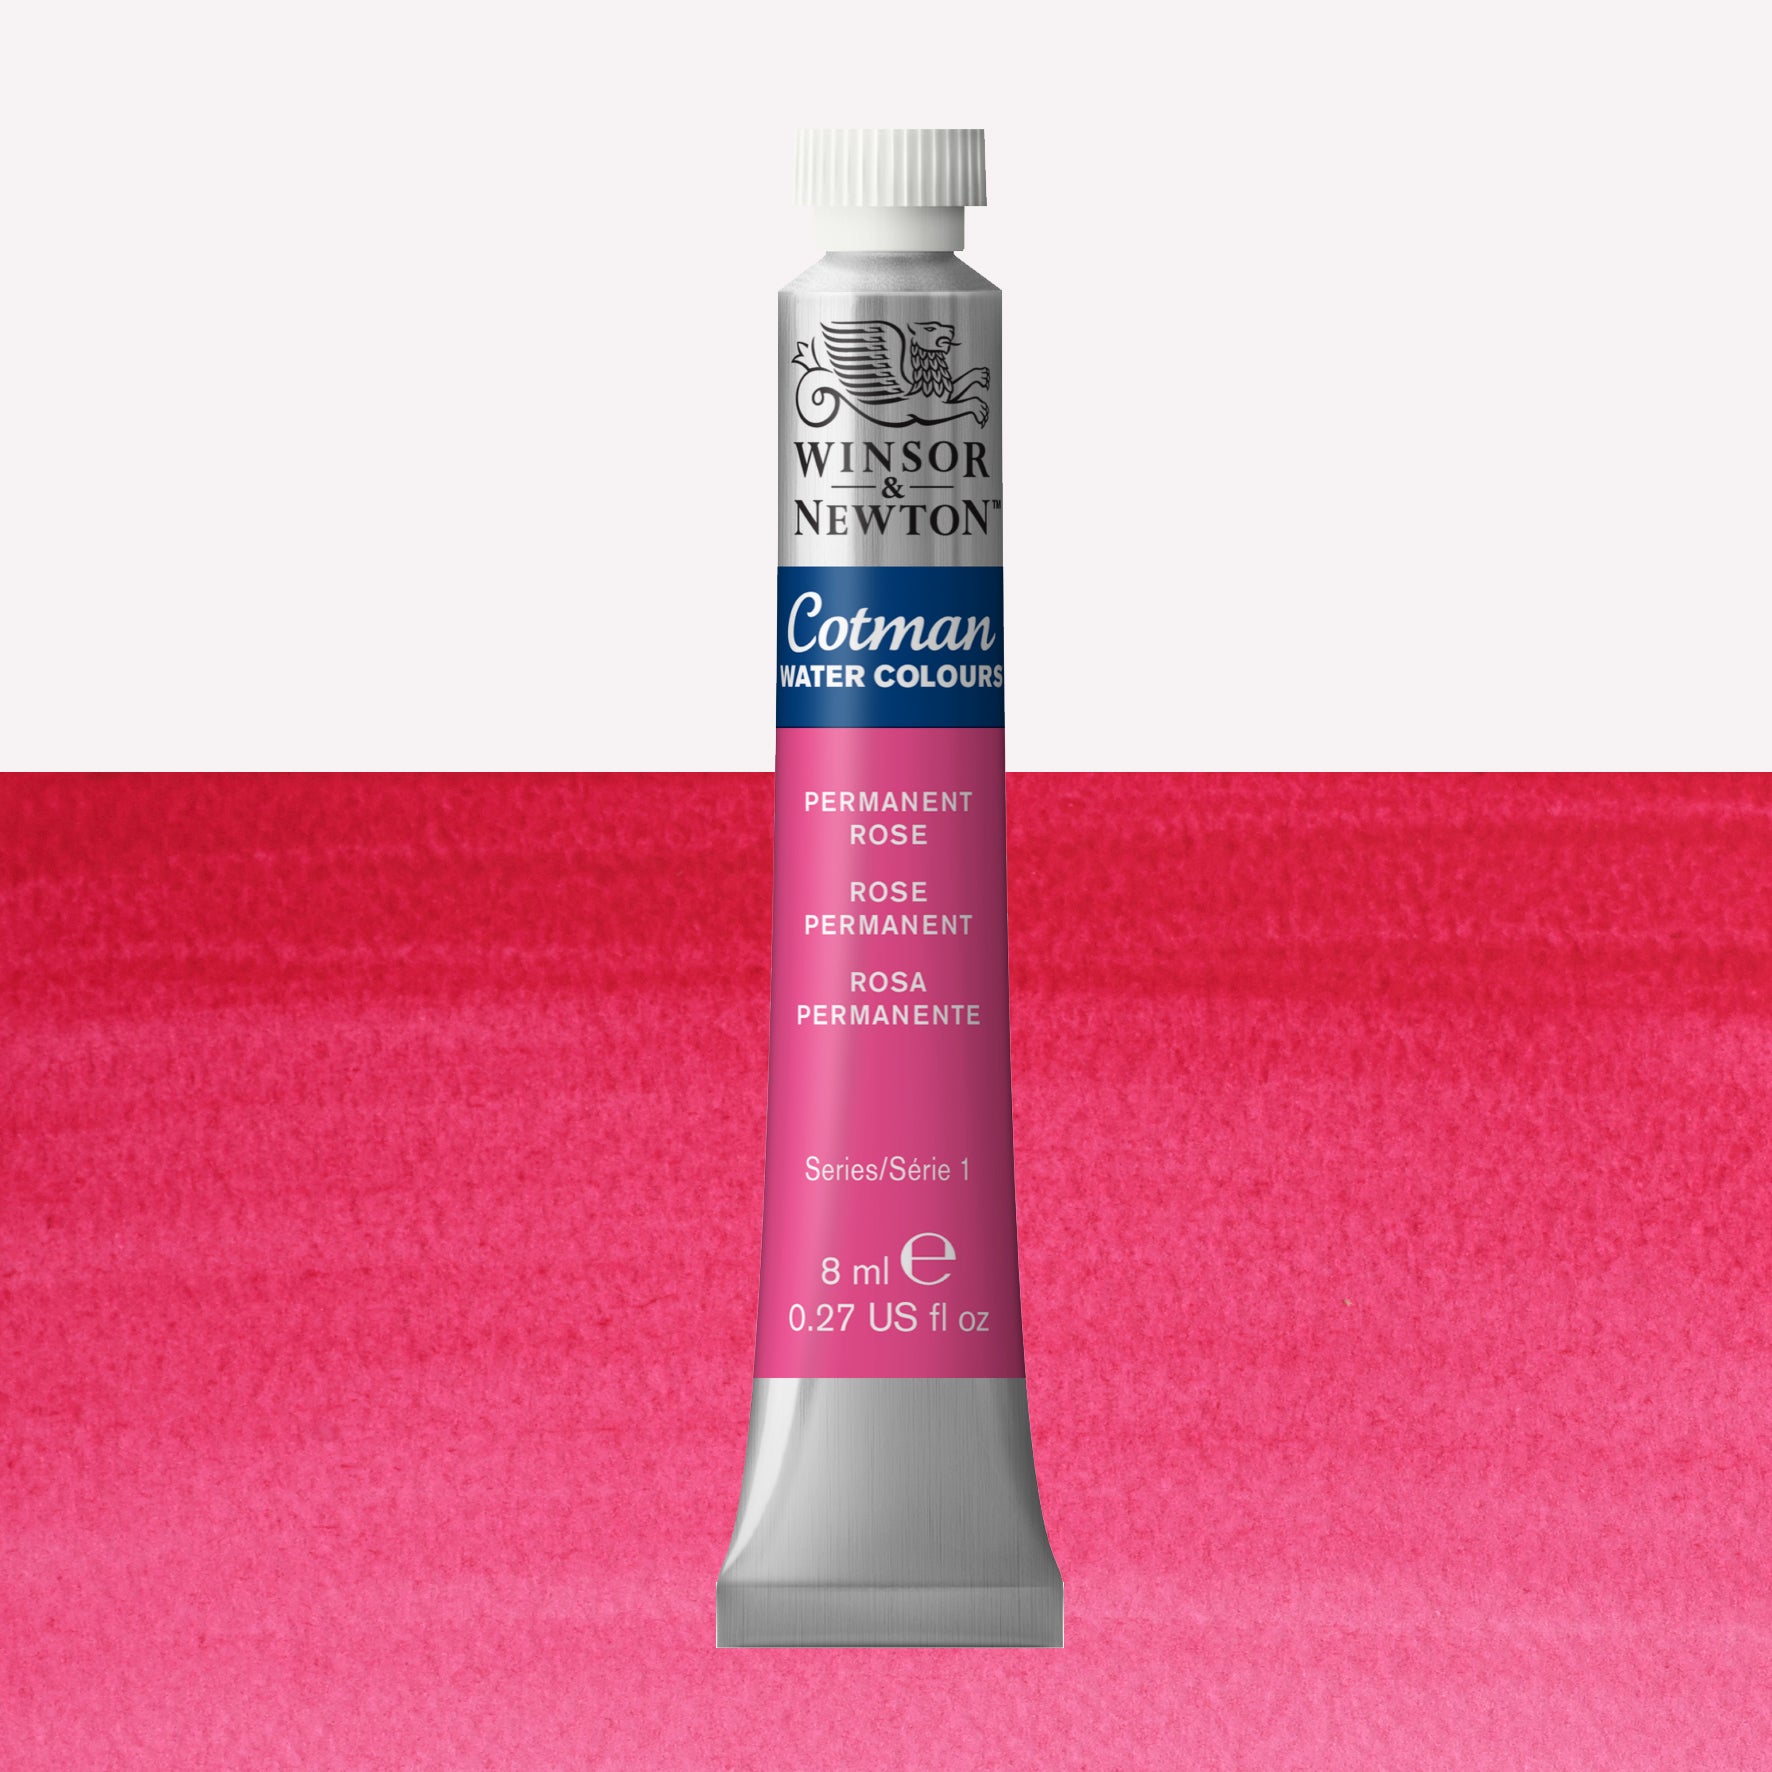 Winsor & Newton Cotman watercolour paint packaged in 8ml silver tubes with a white lid in the shade Permanent Rose over a highly pigmented colour swatch.